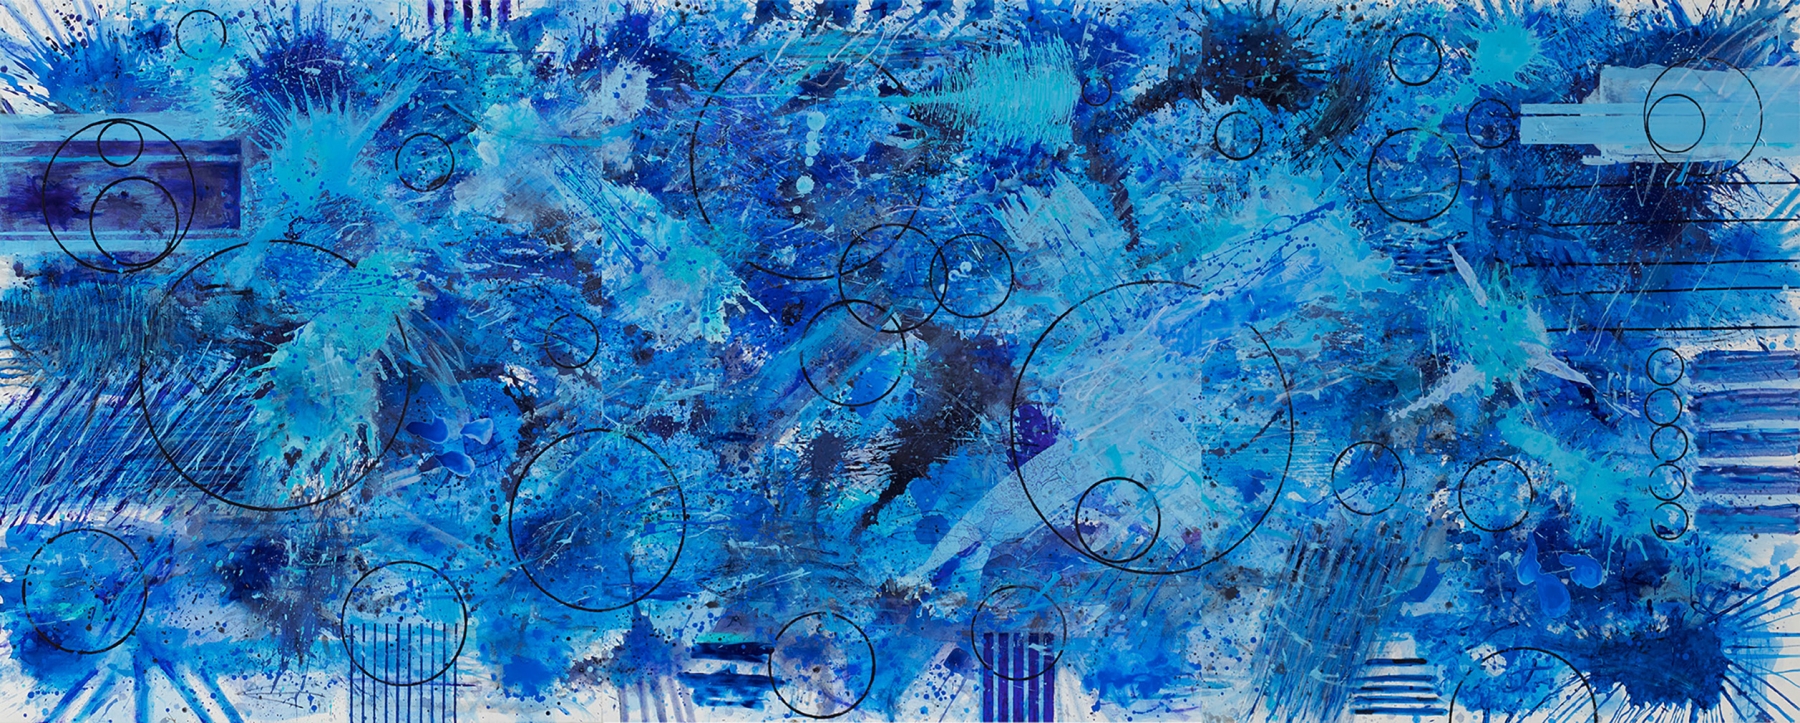 J. Steven Manolis, BlueLand-Splash painting, 2018, 72 x 180 inches, Acrylic painting on canvas, Extra large Wall Art, Blue Abstract Art for sale at Manolis Projects Art Gallery, Miami, Fl